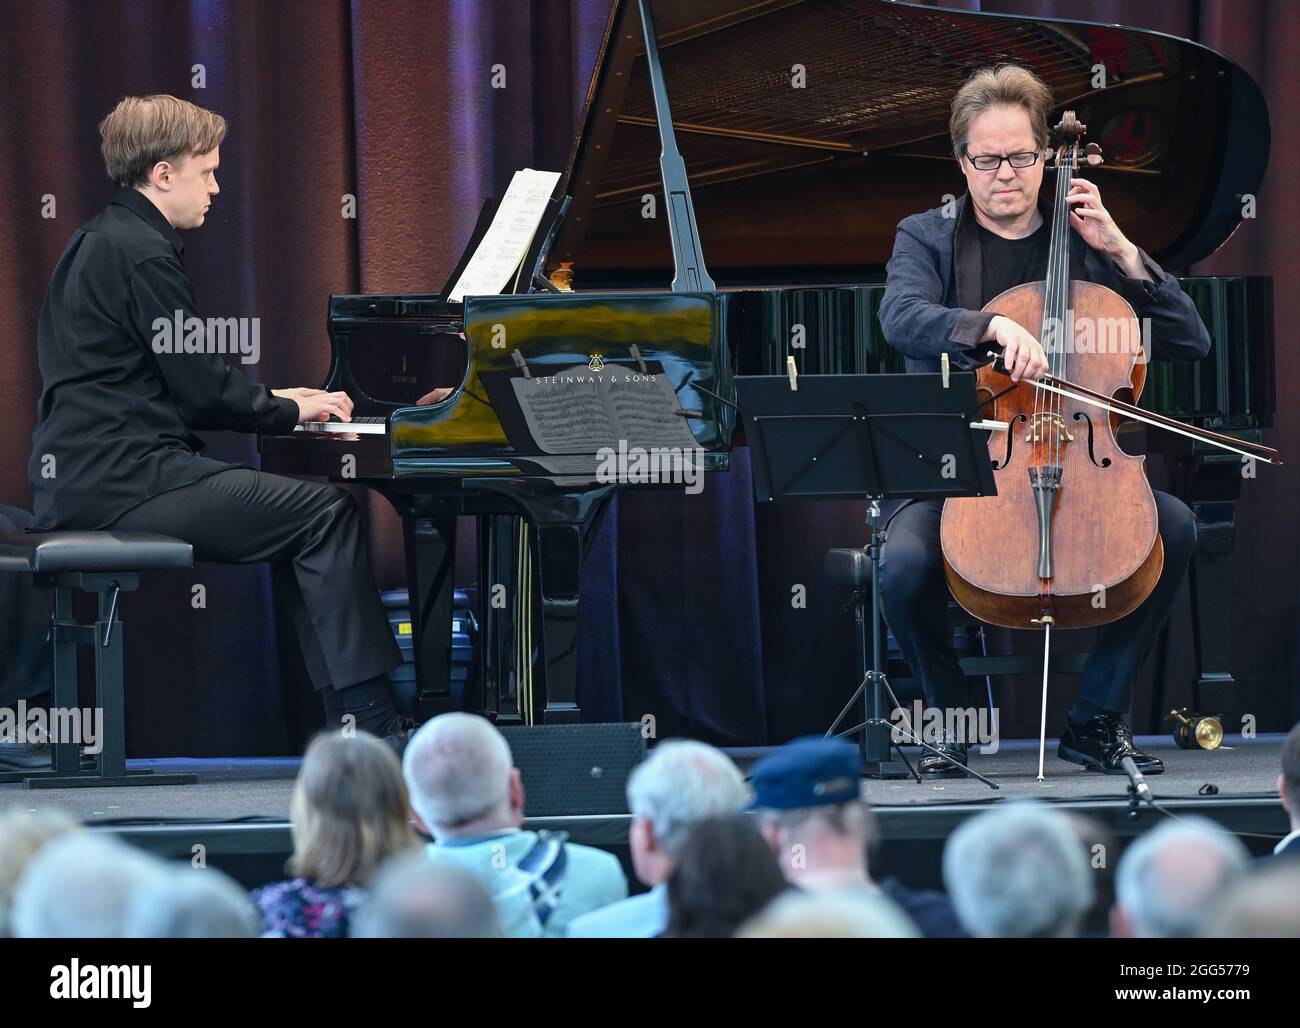 28 August 2021, Brandenburg, Neuhardenberg: Jan Vogler (r), musician on the  cello, plays together with Antti Siirala on the grand piano on stage at the  end of the course "Meisterschüler-Meister" for the